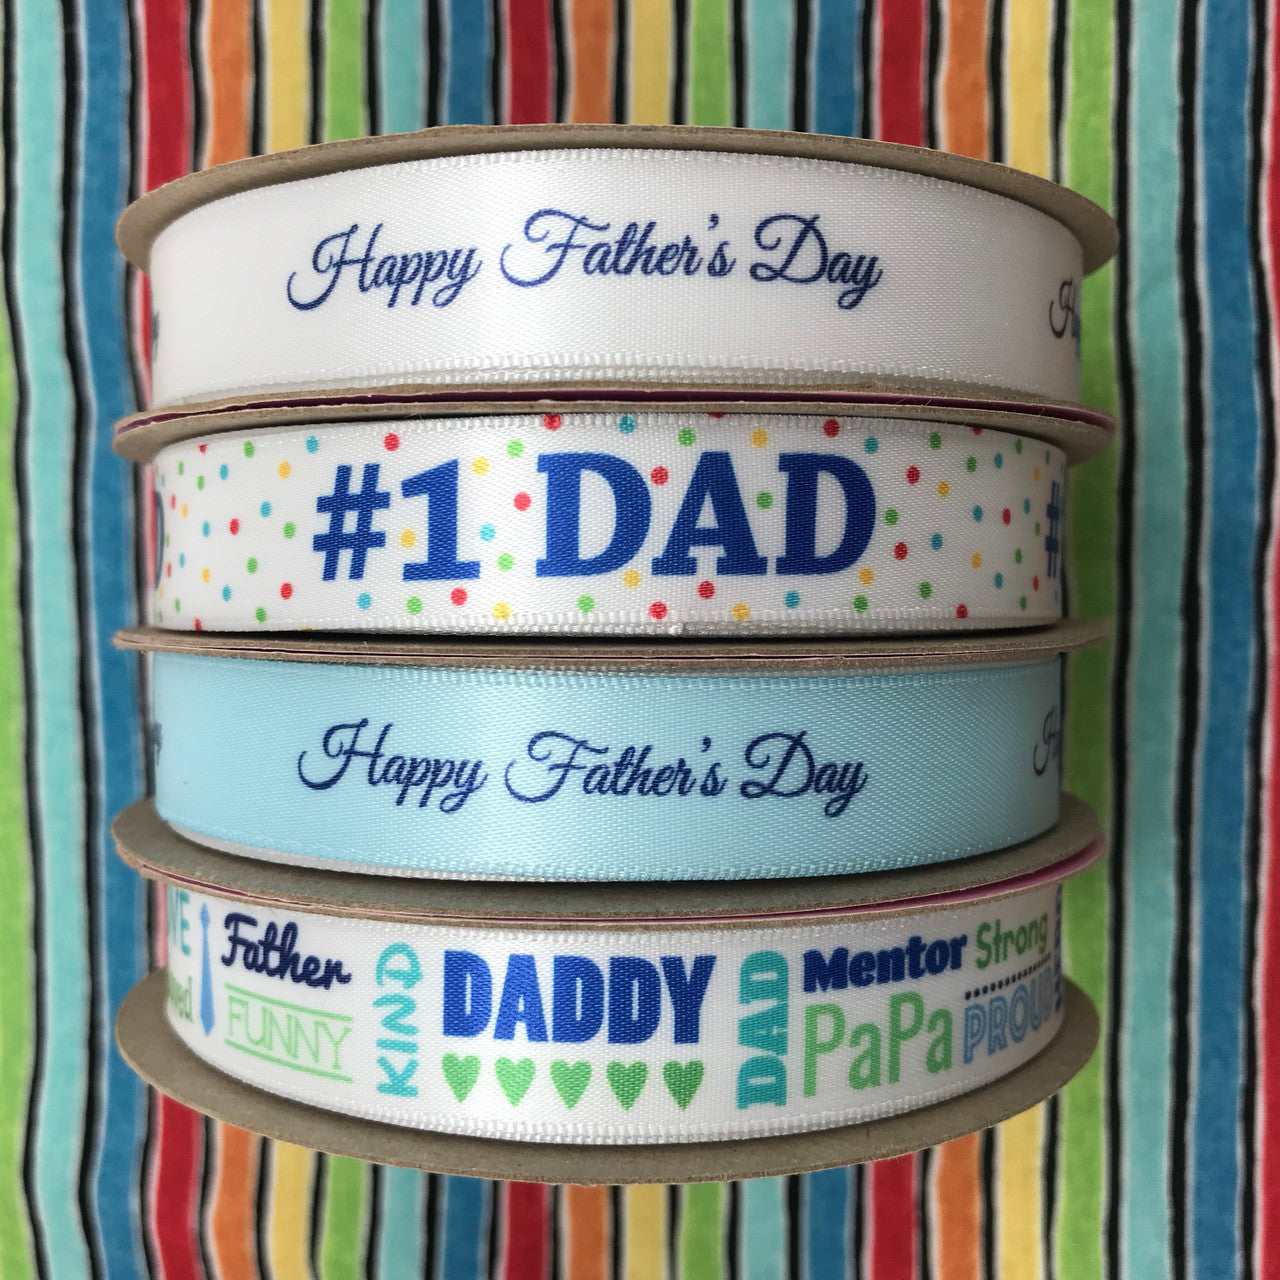 Mix and Match our Father's Day ribbons to make the best gift package ever for Dad!